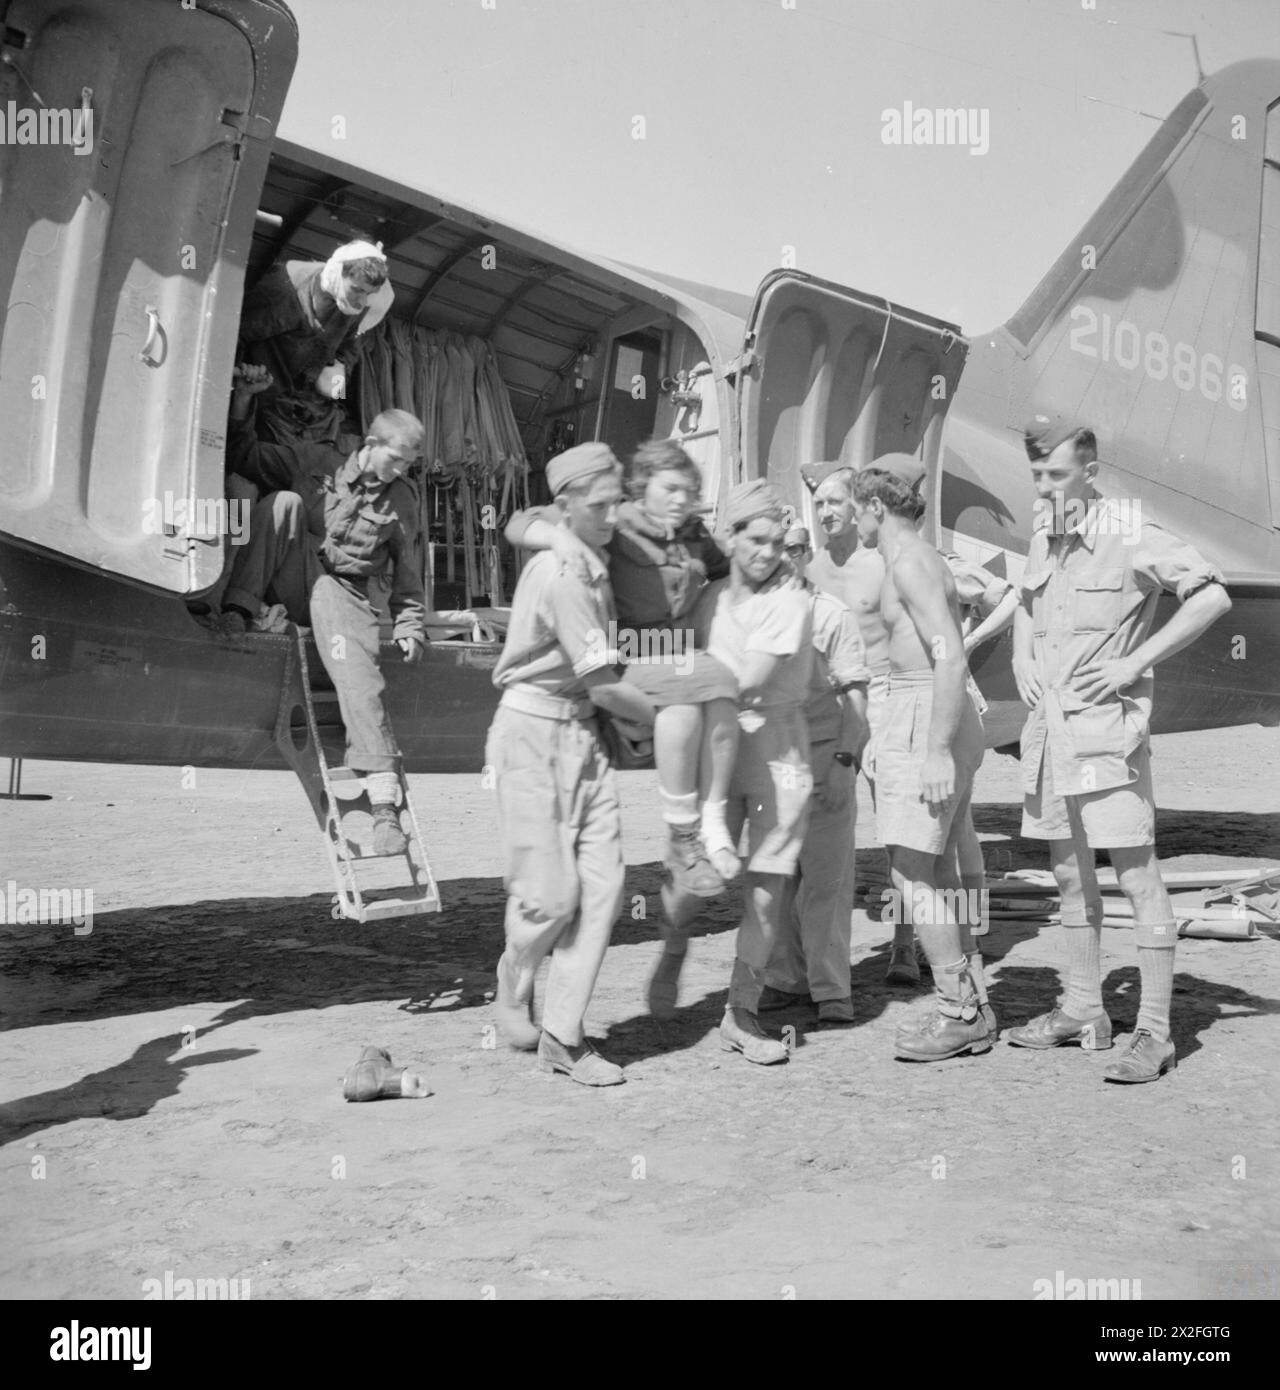 THE ROYAL AIR FORCE IN YUGOSLAVIA, 1944-1945 - The RAF evacuating wounded partisans from Yugoslavia. A wounded female partisan being carried from one of the transport aircraft on arrival in Italy, 1944 Royal Air Force Stock Photo